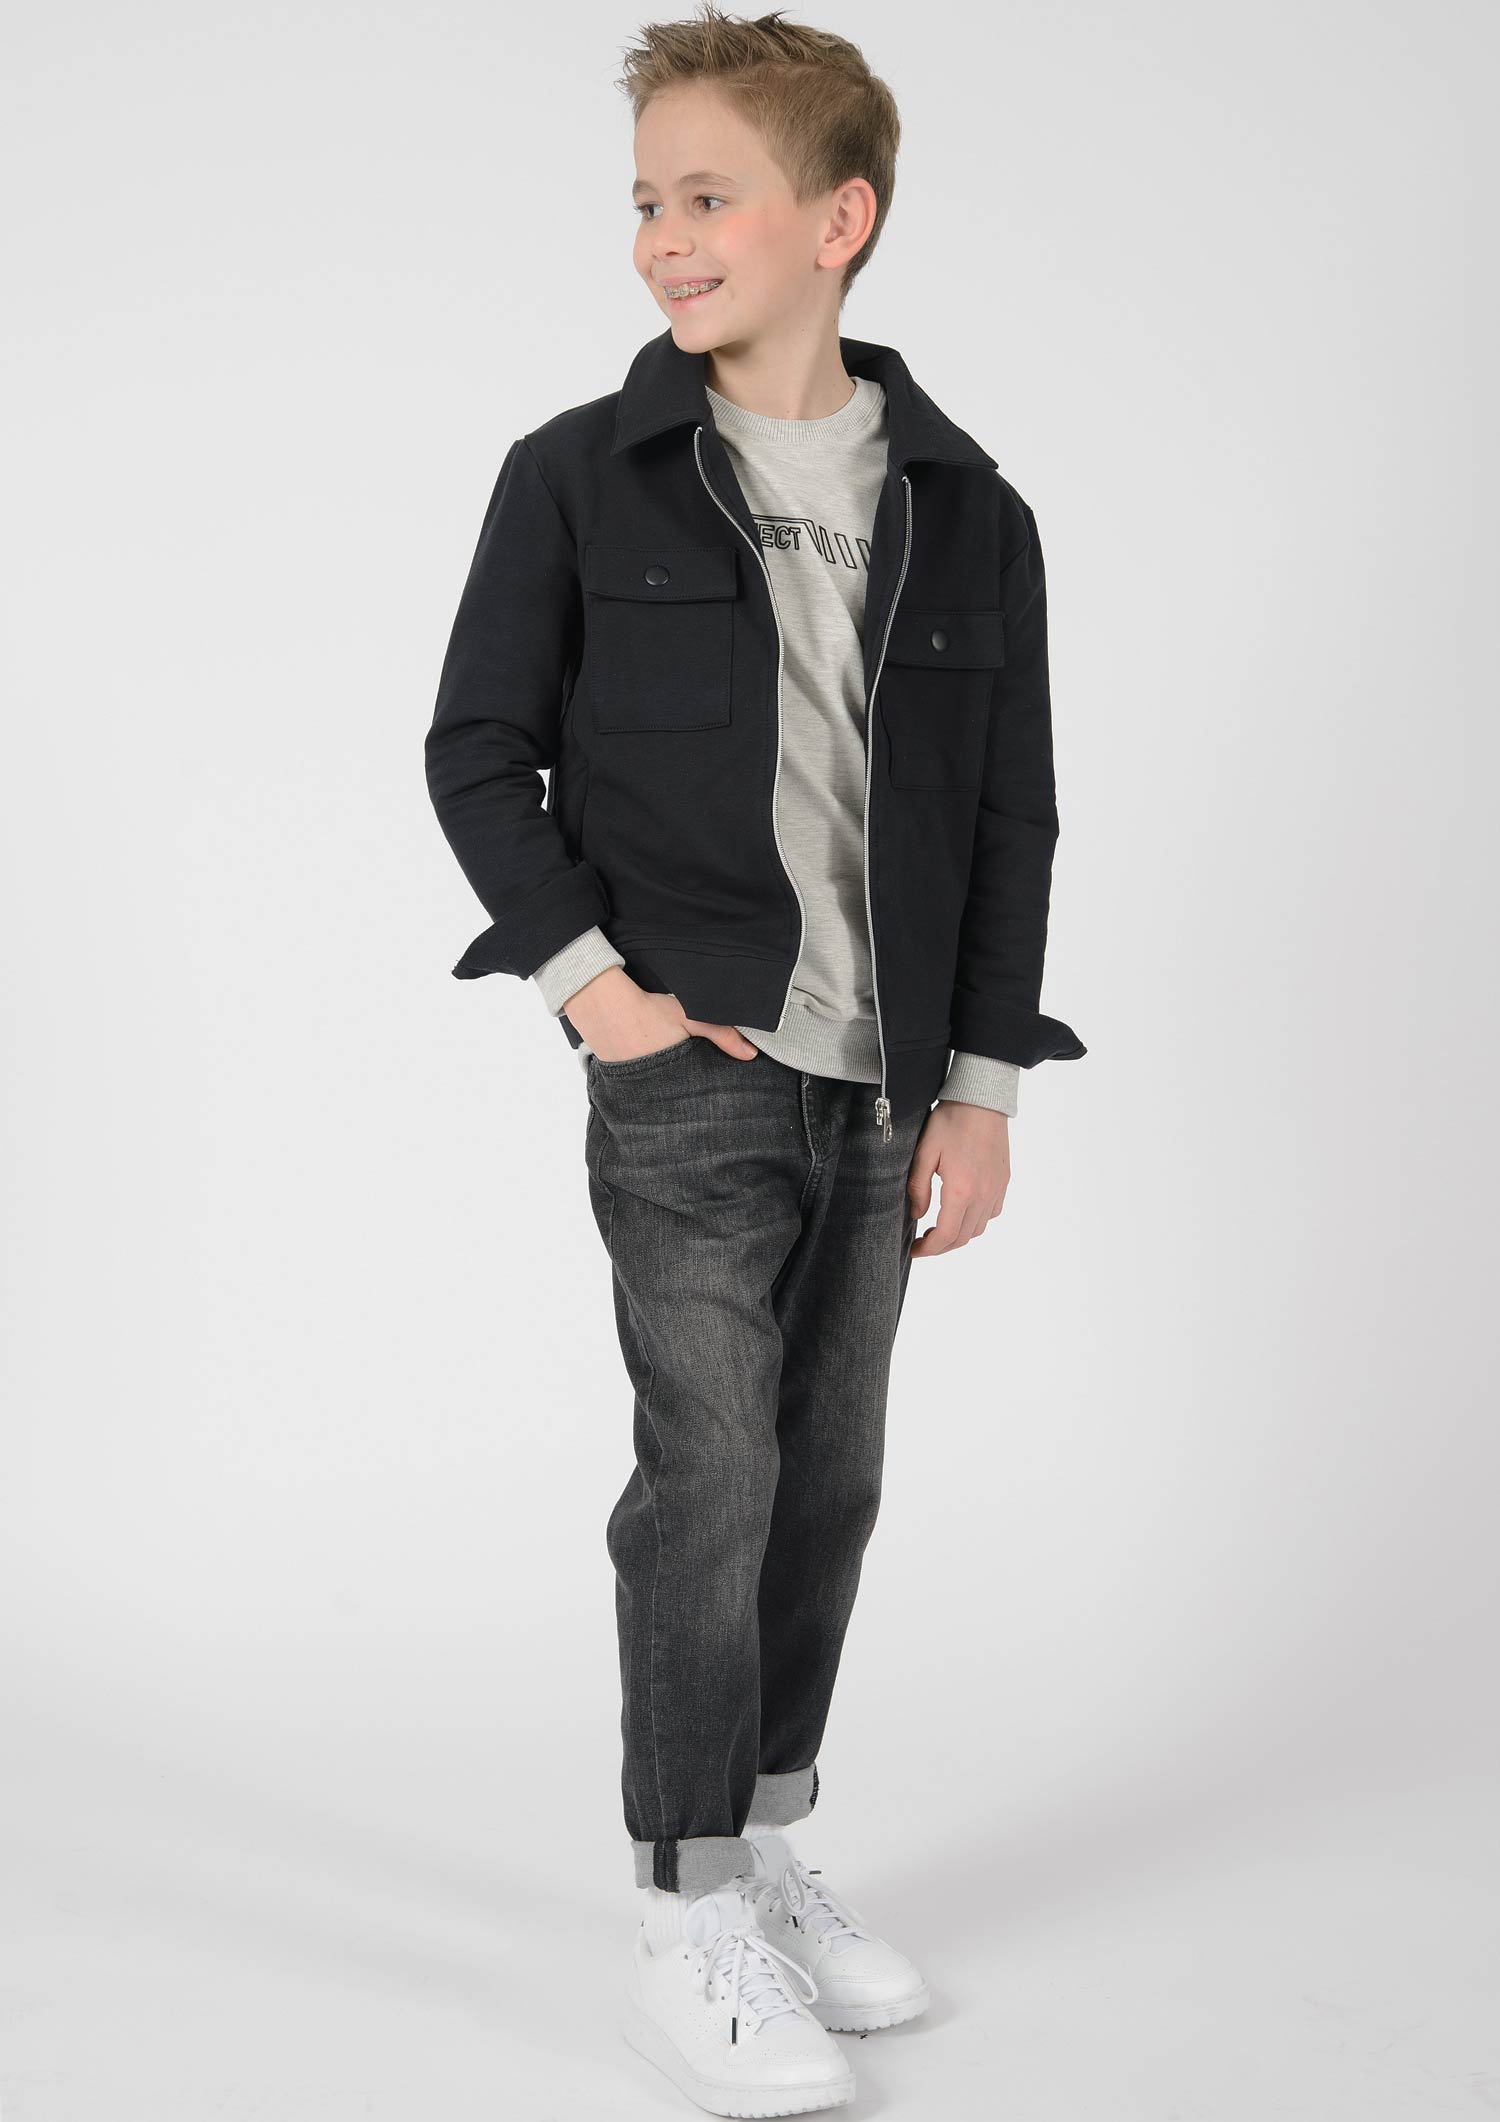 2833-Boys Relaxed Fit Jeans verfügbar in Slim,Normal,Wide